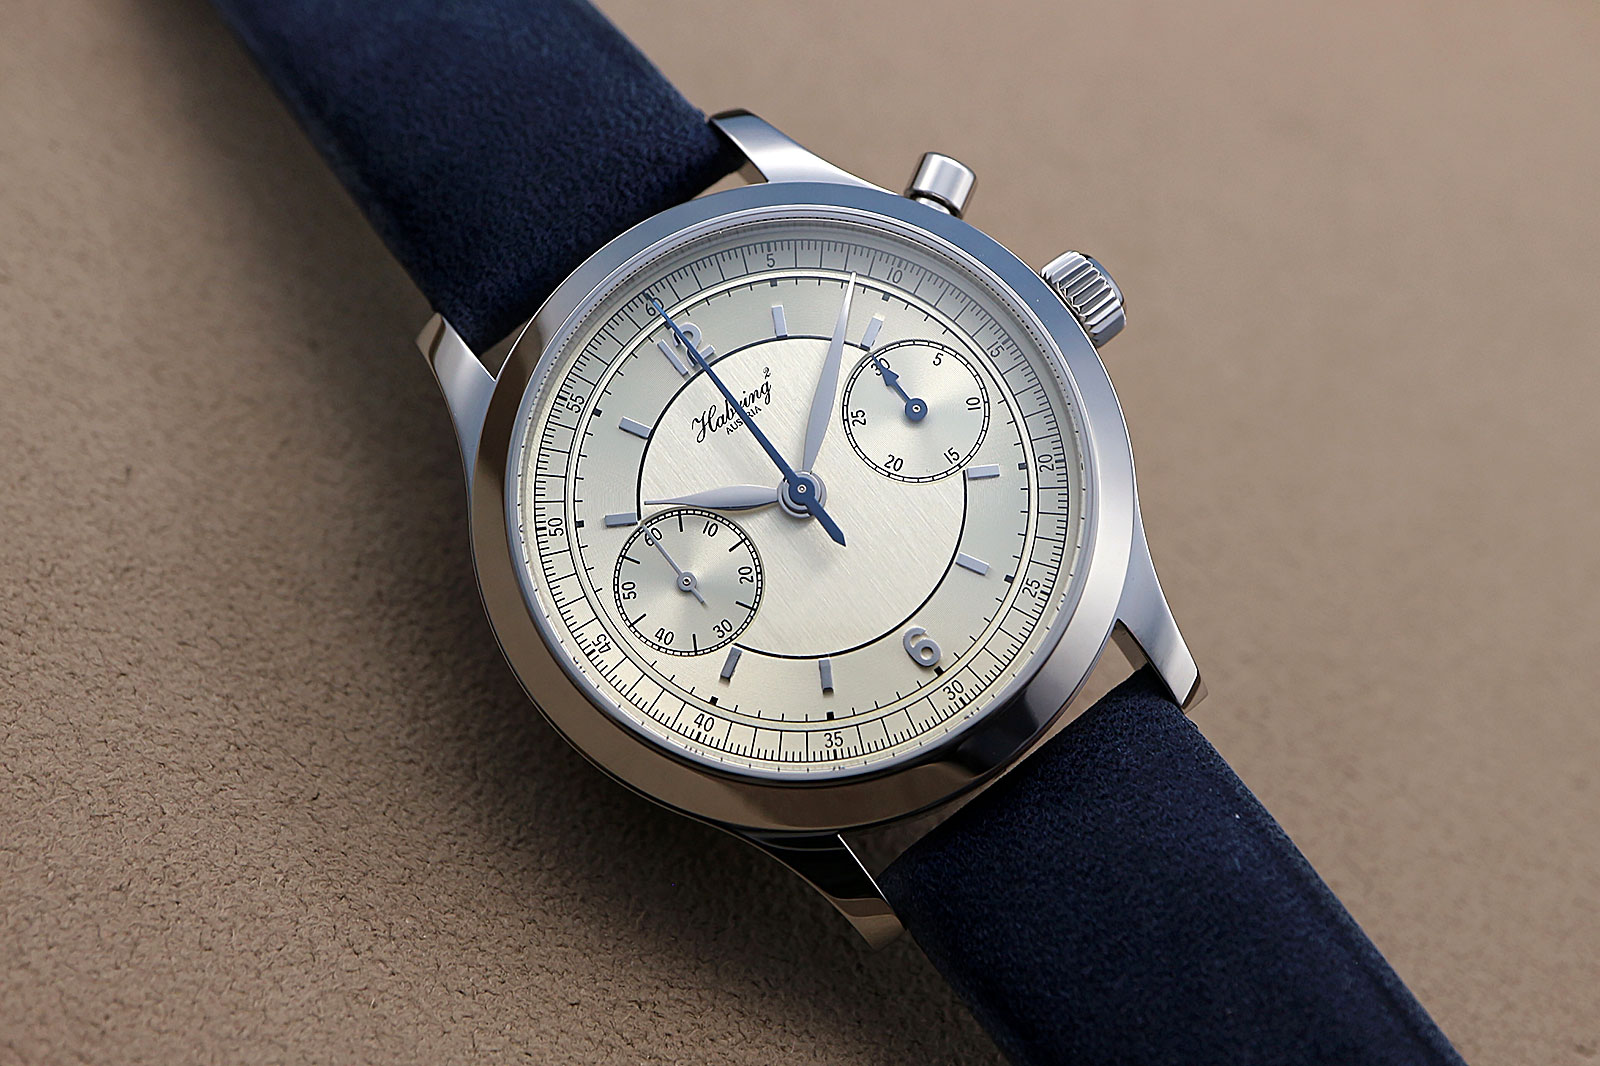 Habring2 Introduces the Shellman 50th Anniversary “Sector” Dial | SJX ...